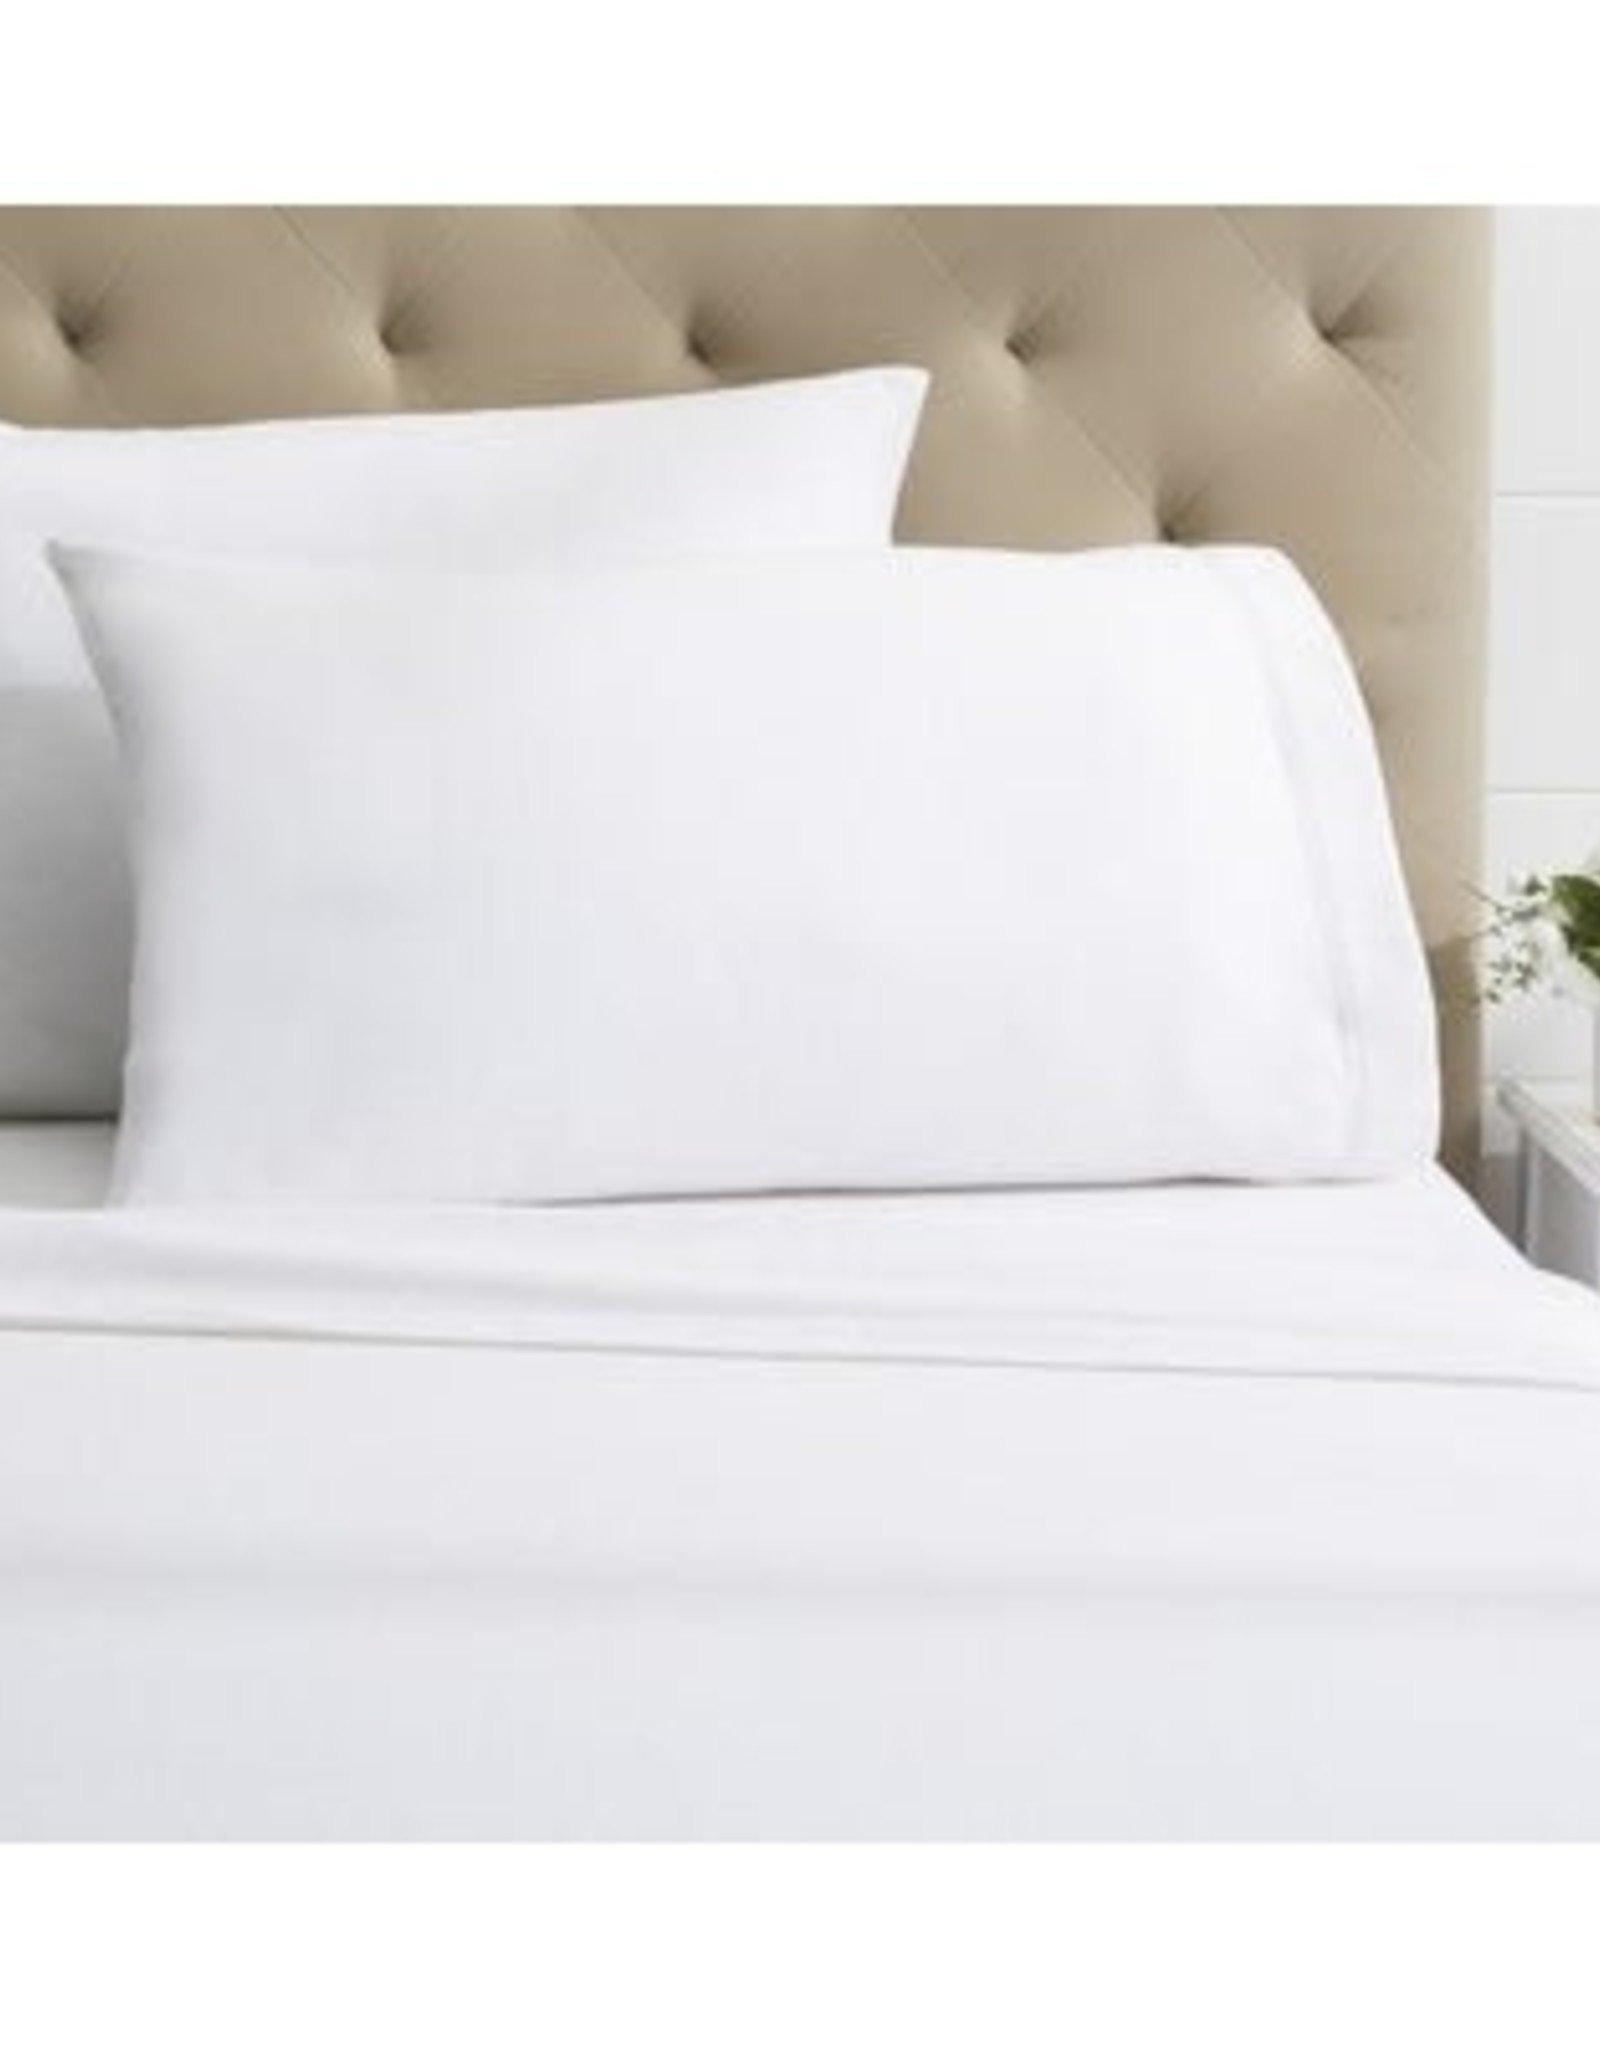 Sheets Dormisette Flannel King White Fitted - Design Therapy Inc.